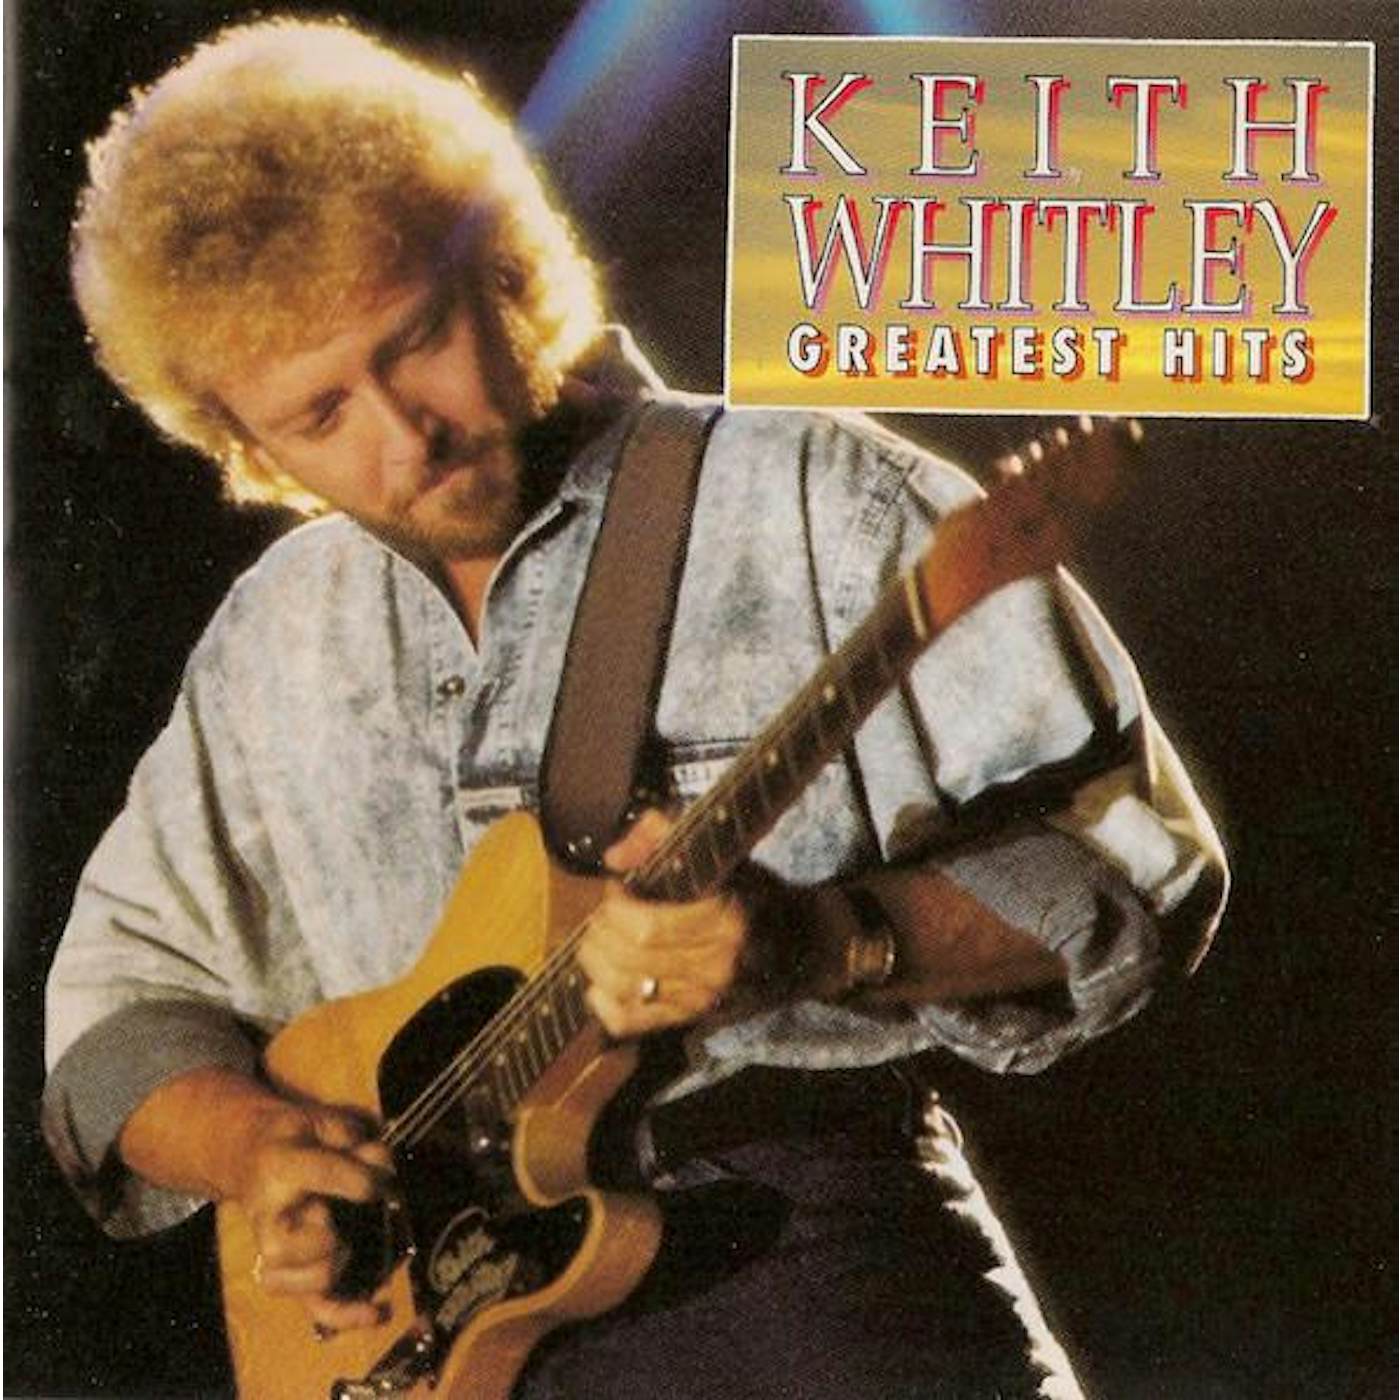 Keith Whitley GREATEST HITS CD